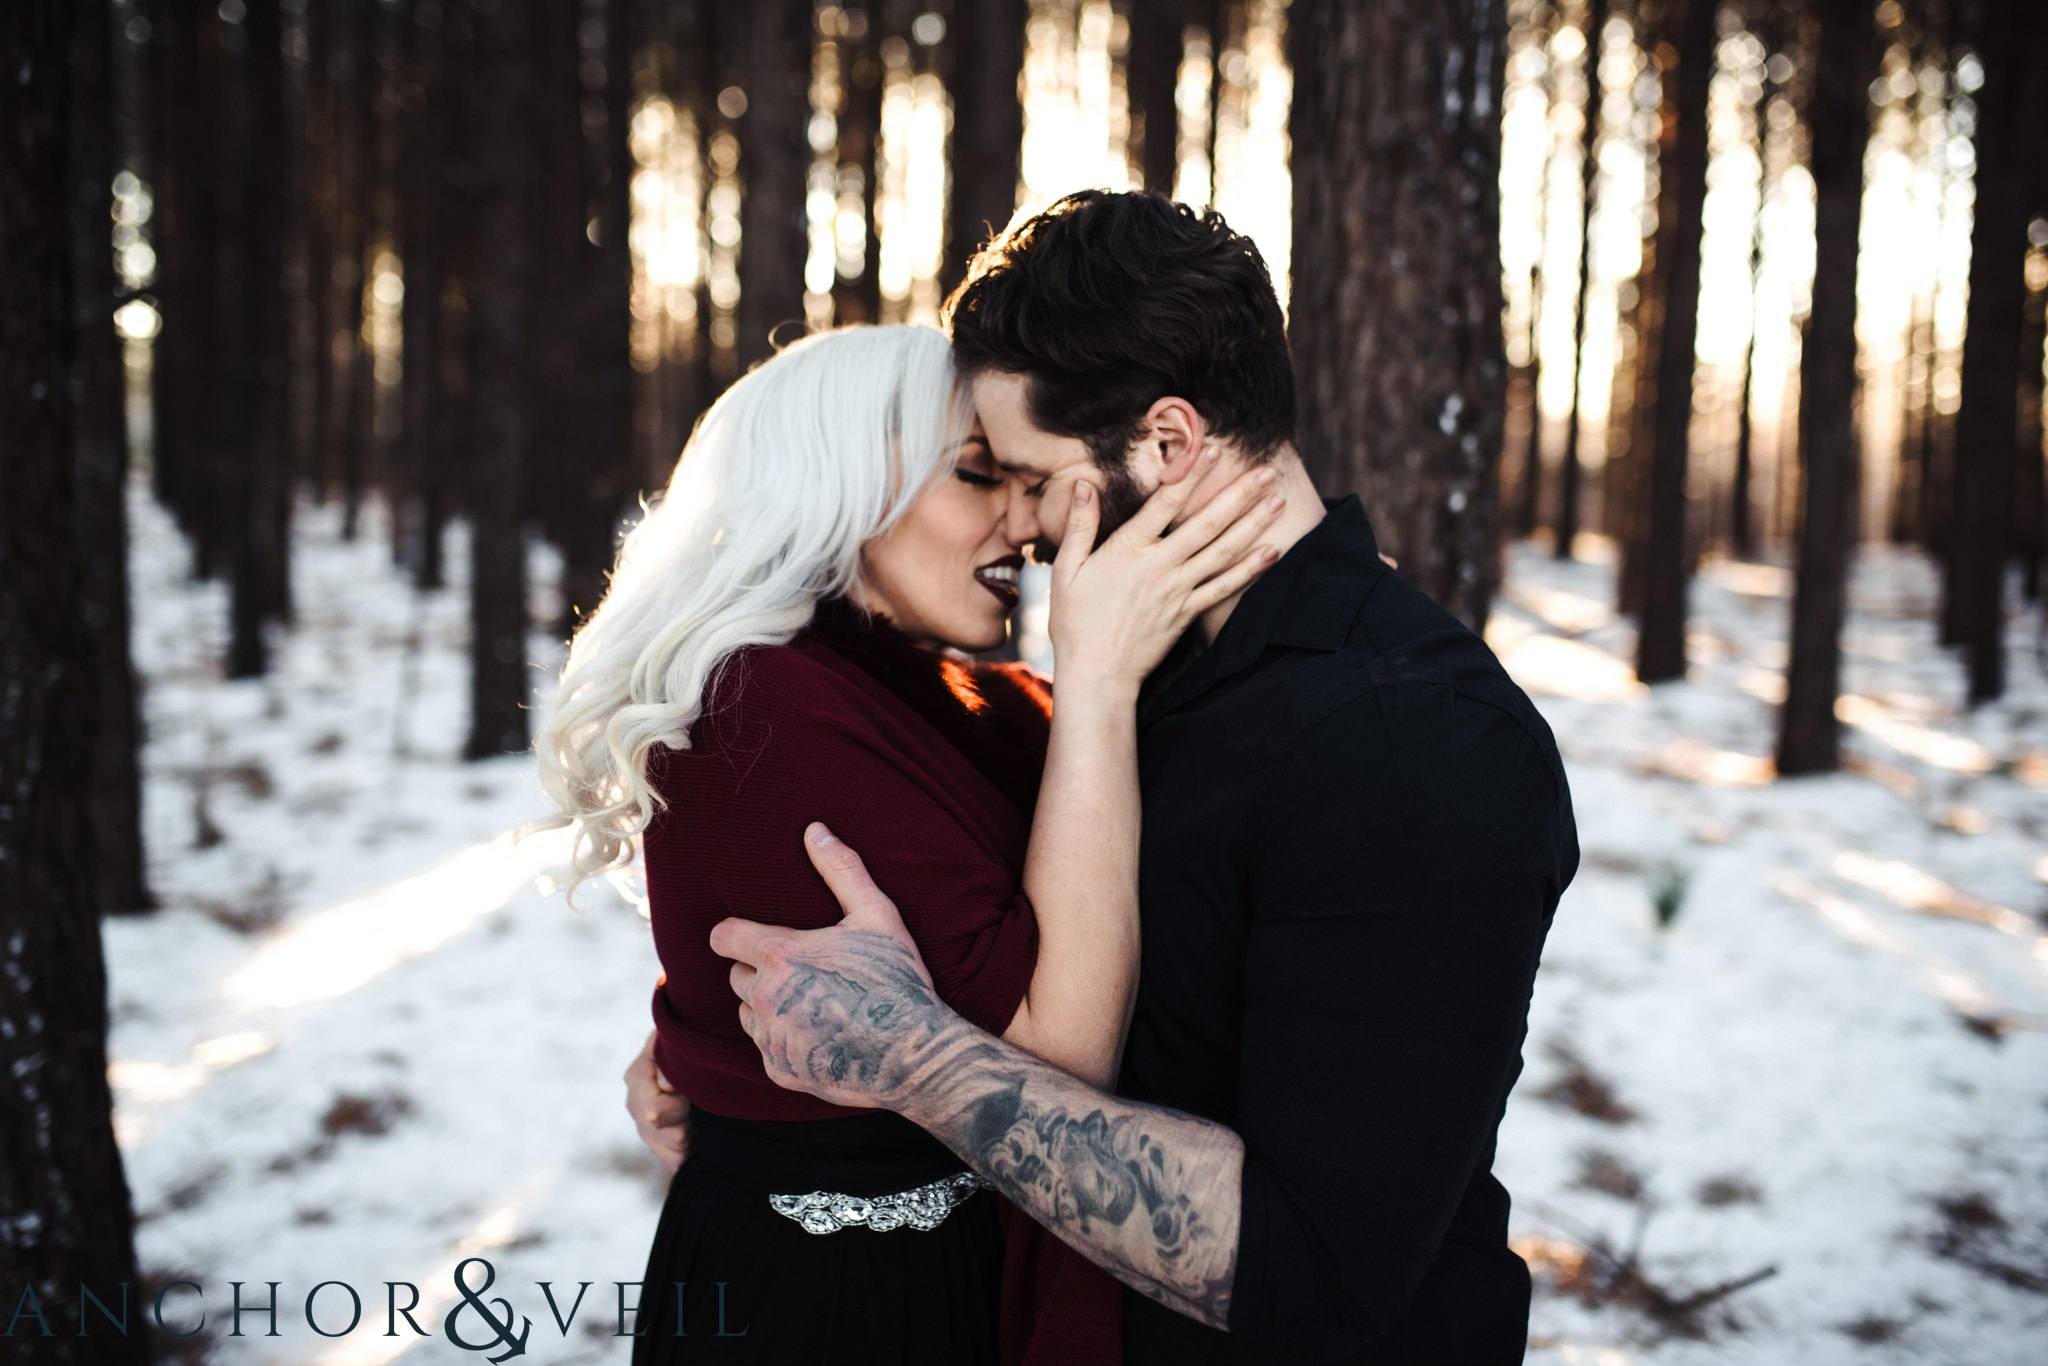 bringing each other in close during their charlotte snow engagement session